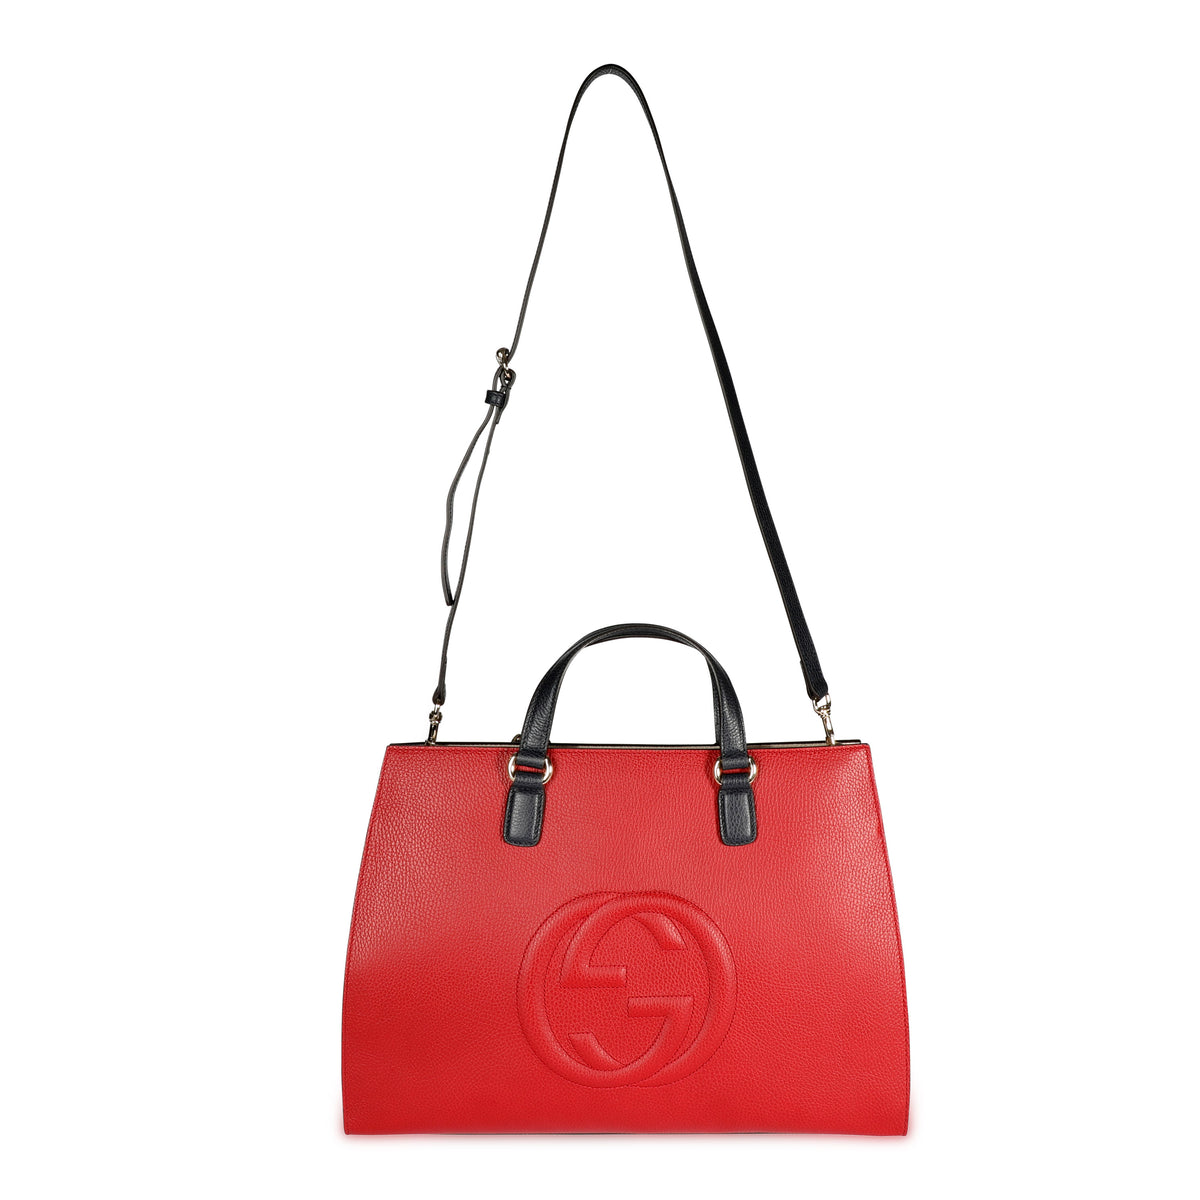 Gucci Red, Navy, & Cream Soho Convertible Tote